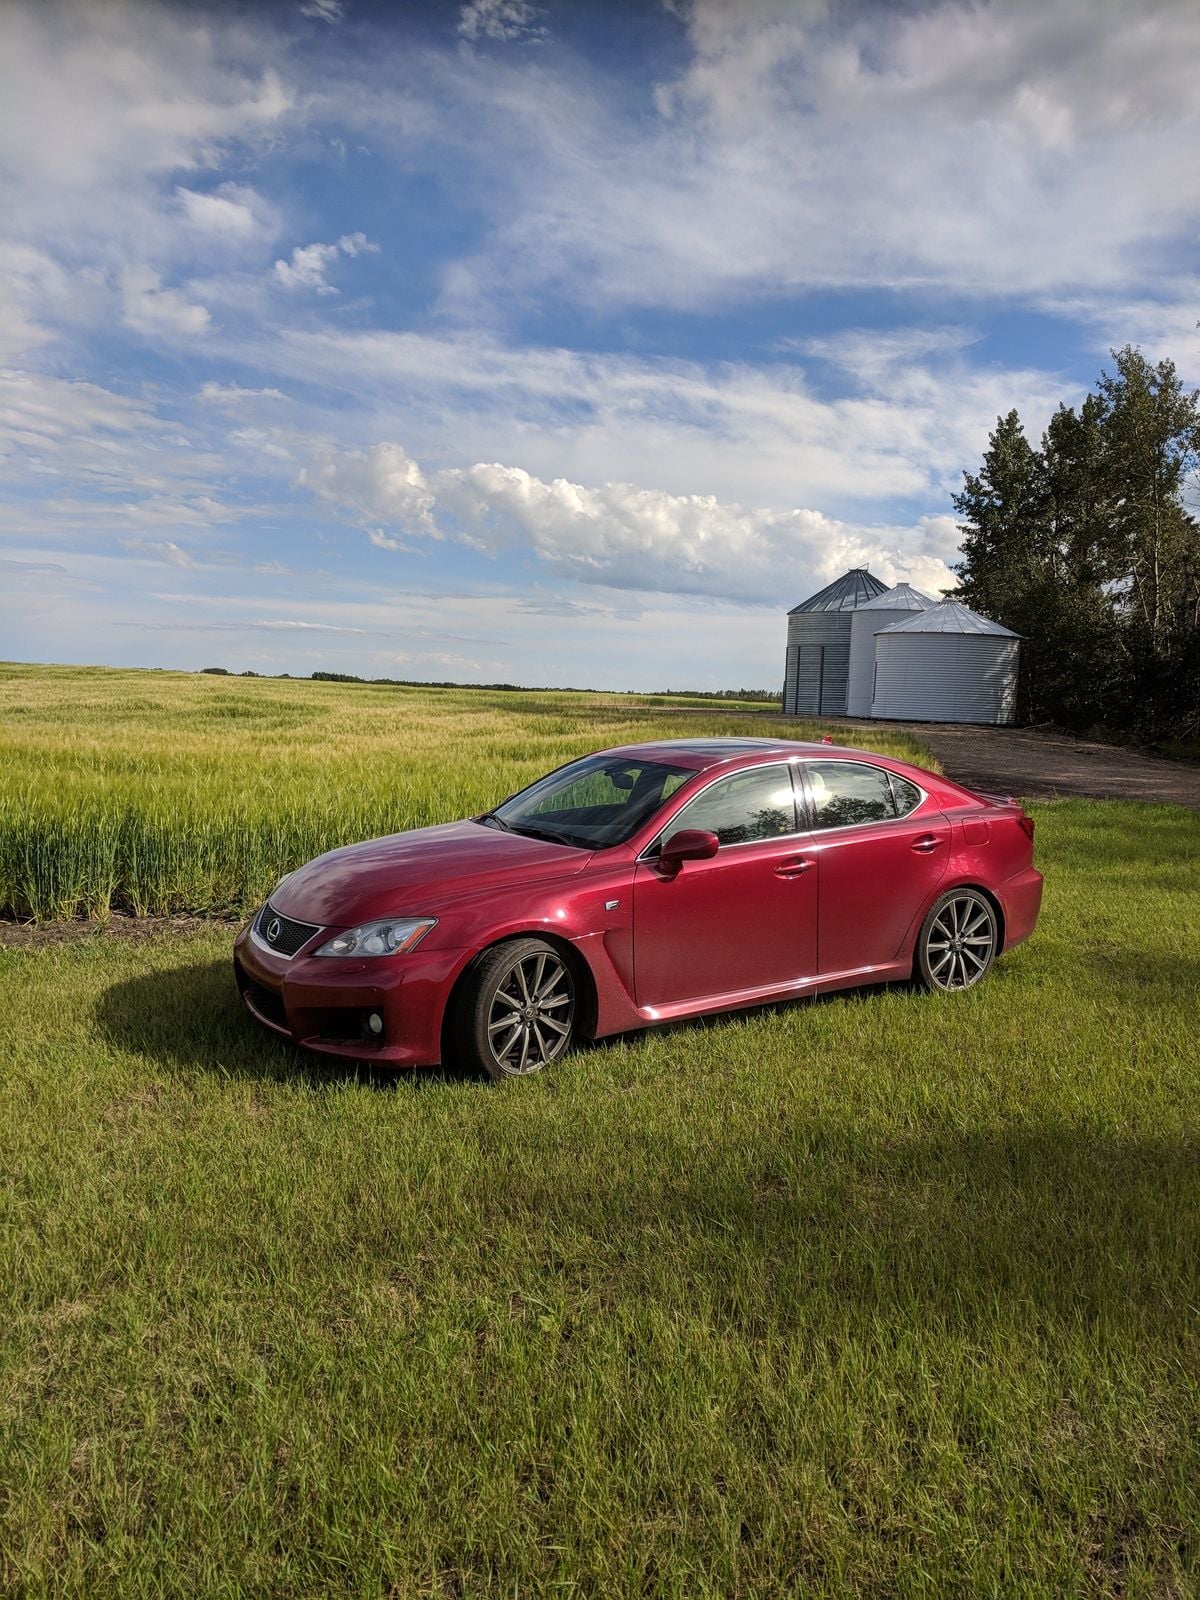 2010 Lexus IS F - $32,000 25000 miles on great ISF - Used - VIN JTHBP5C20A5006849 - 25,000 Miles - 8 cyl - Red - Red Deer, AB T4N2P3, Canada